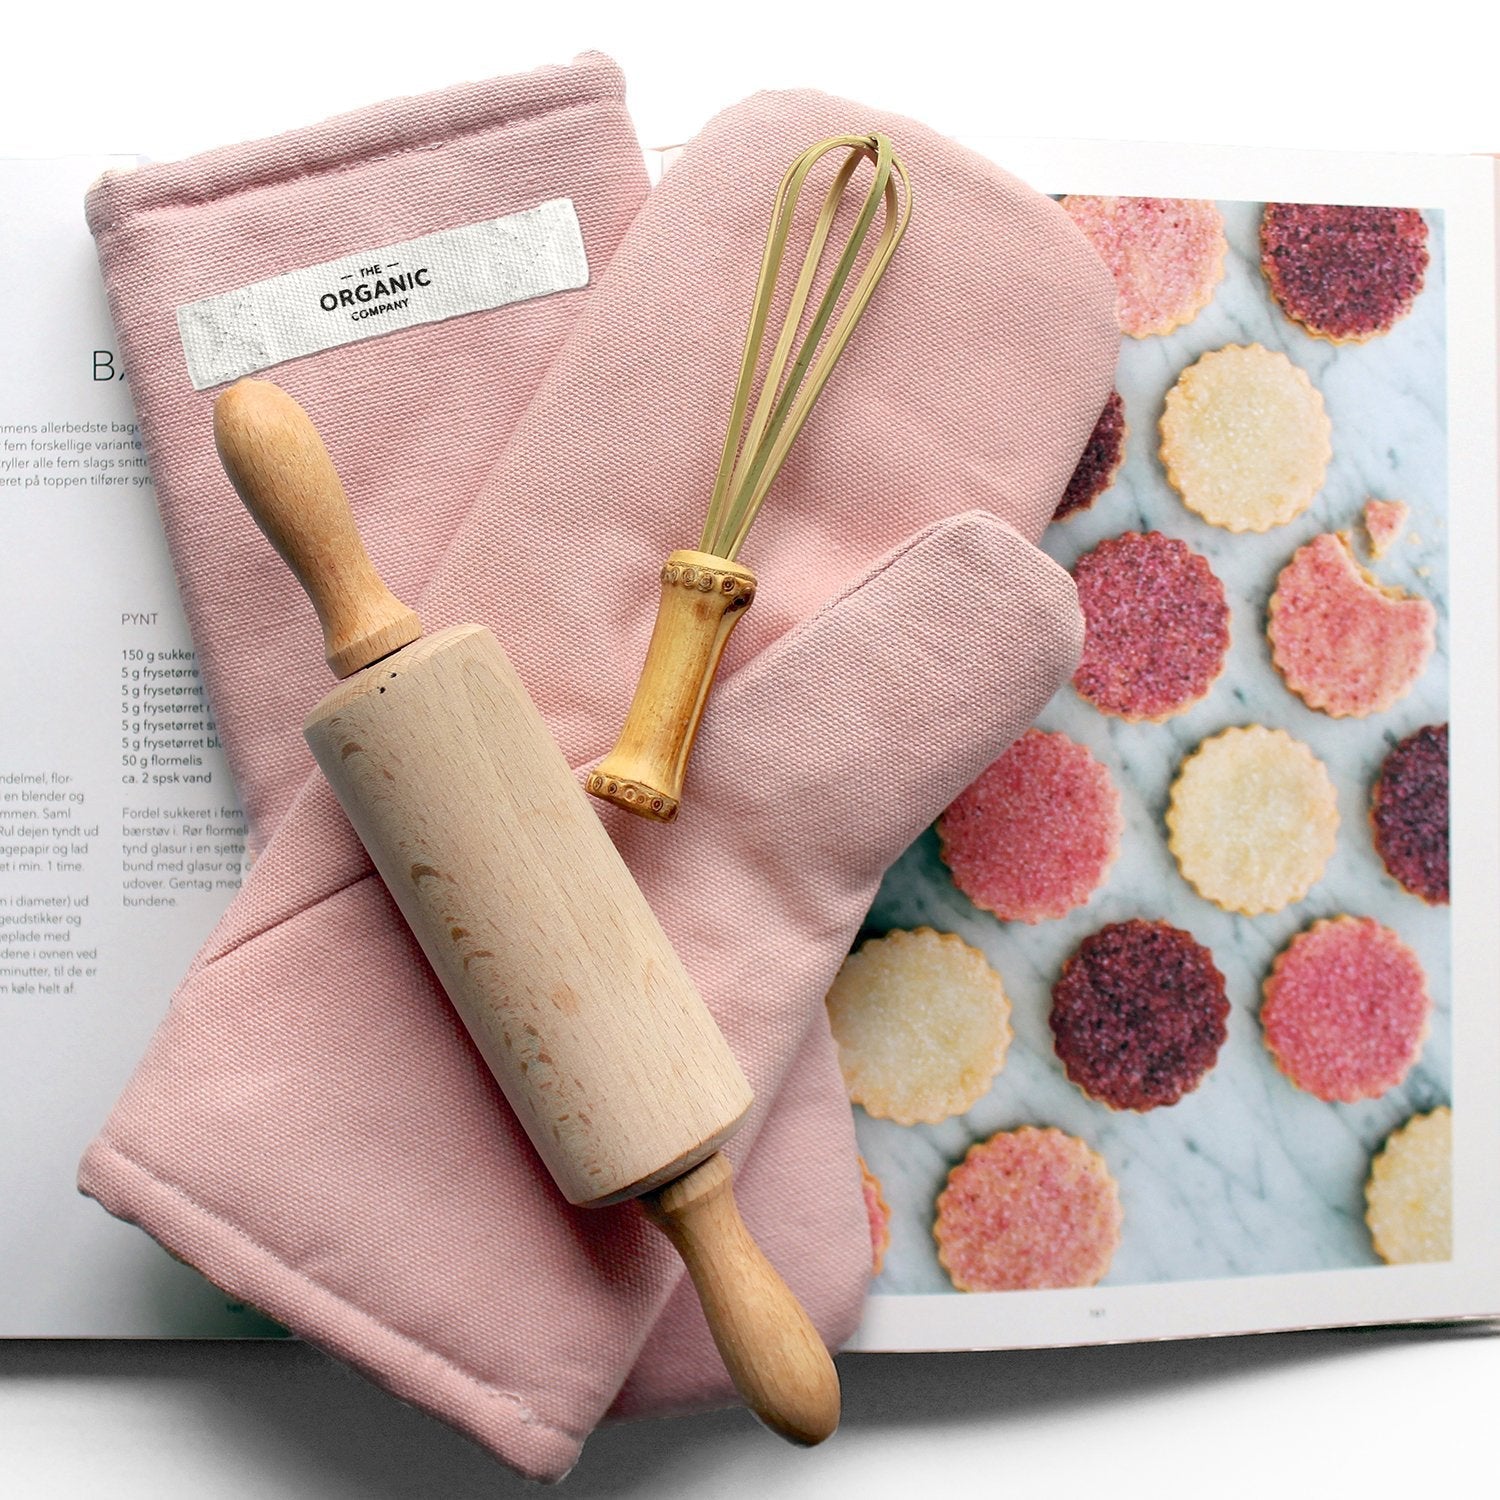 https://www.goodeeworld.com/cdn/shop/products/Goodee-The-Organic-Company-Oven-Mitts-Pair-Pale-Rose-2_58f2c9c6-8c6e-4d22-a306-8a311f377165.jpg?v=1700495741